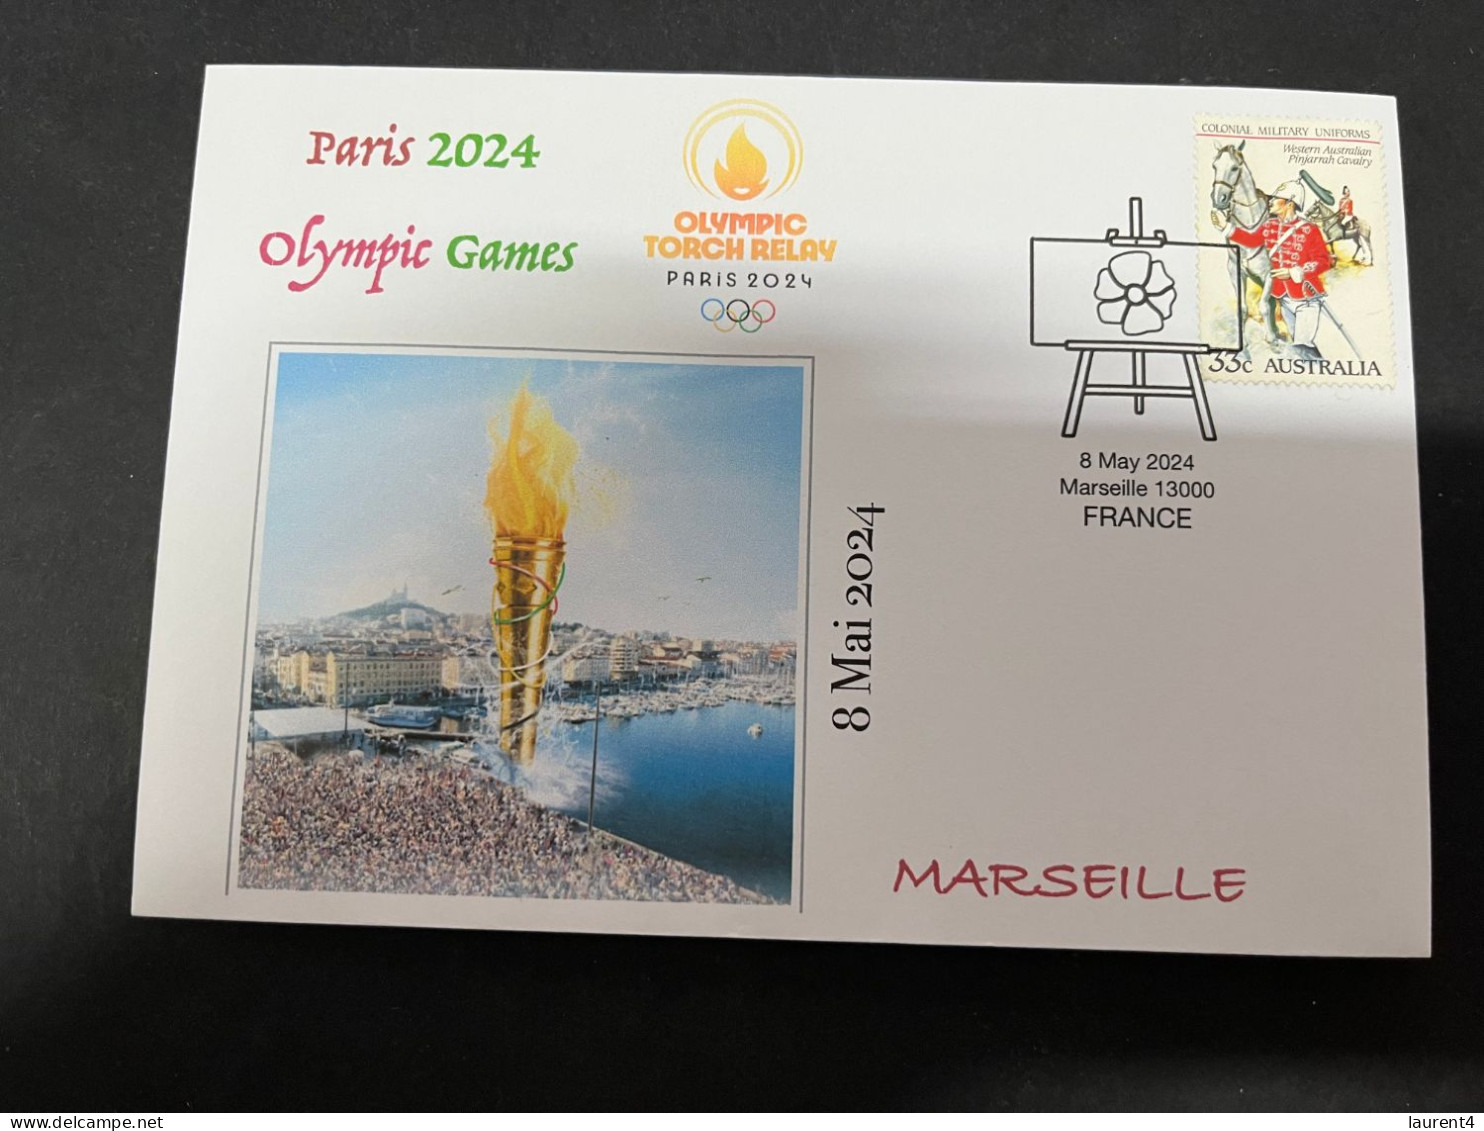 9-5-2024 (4 Z 32) Paris Olympic Games 2024 - The Olympic Flame Travel On Sail Ship BELEM Arrive In Marseille (8-5-2024) - Sommer 2024: Paris